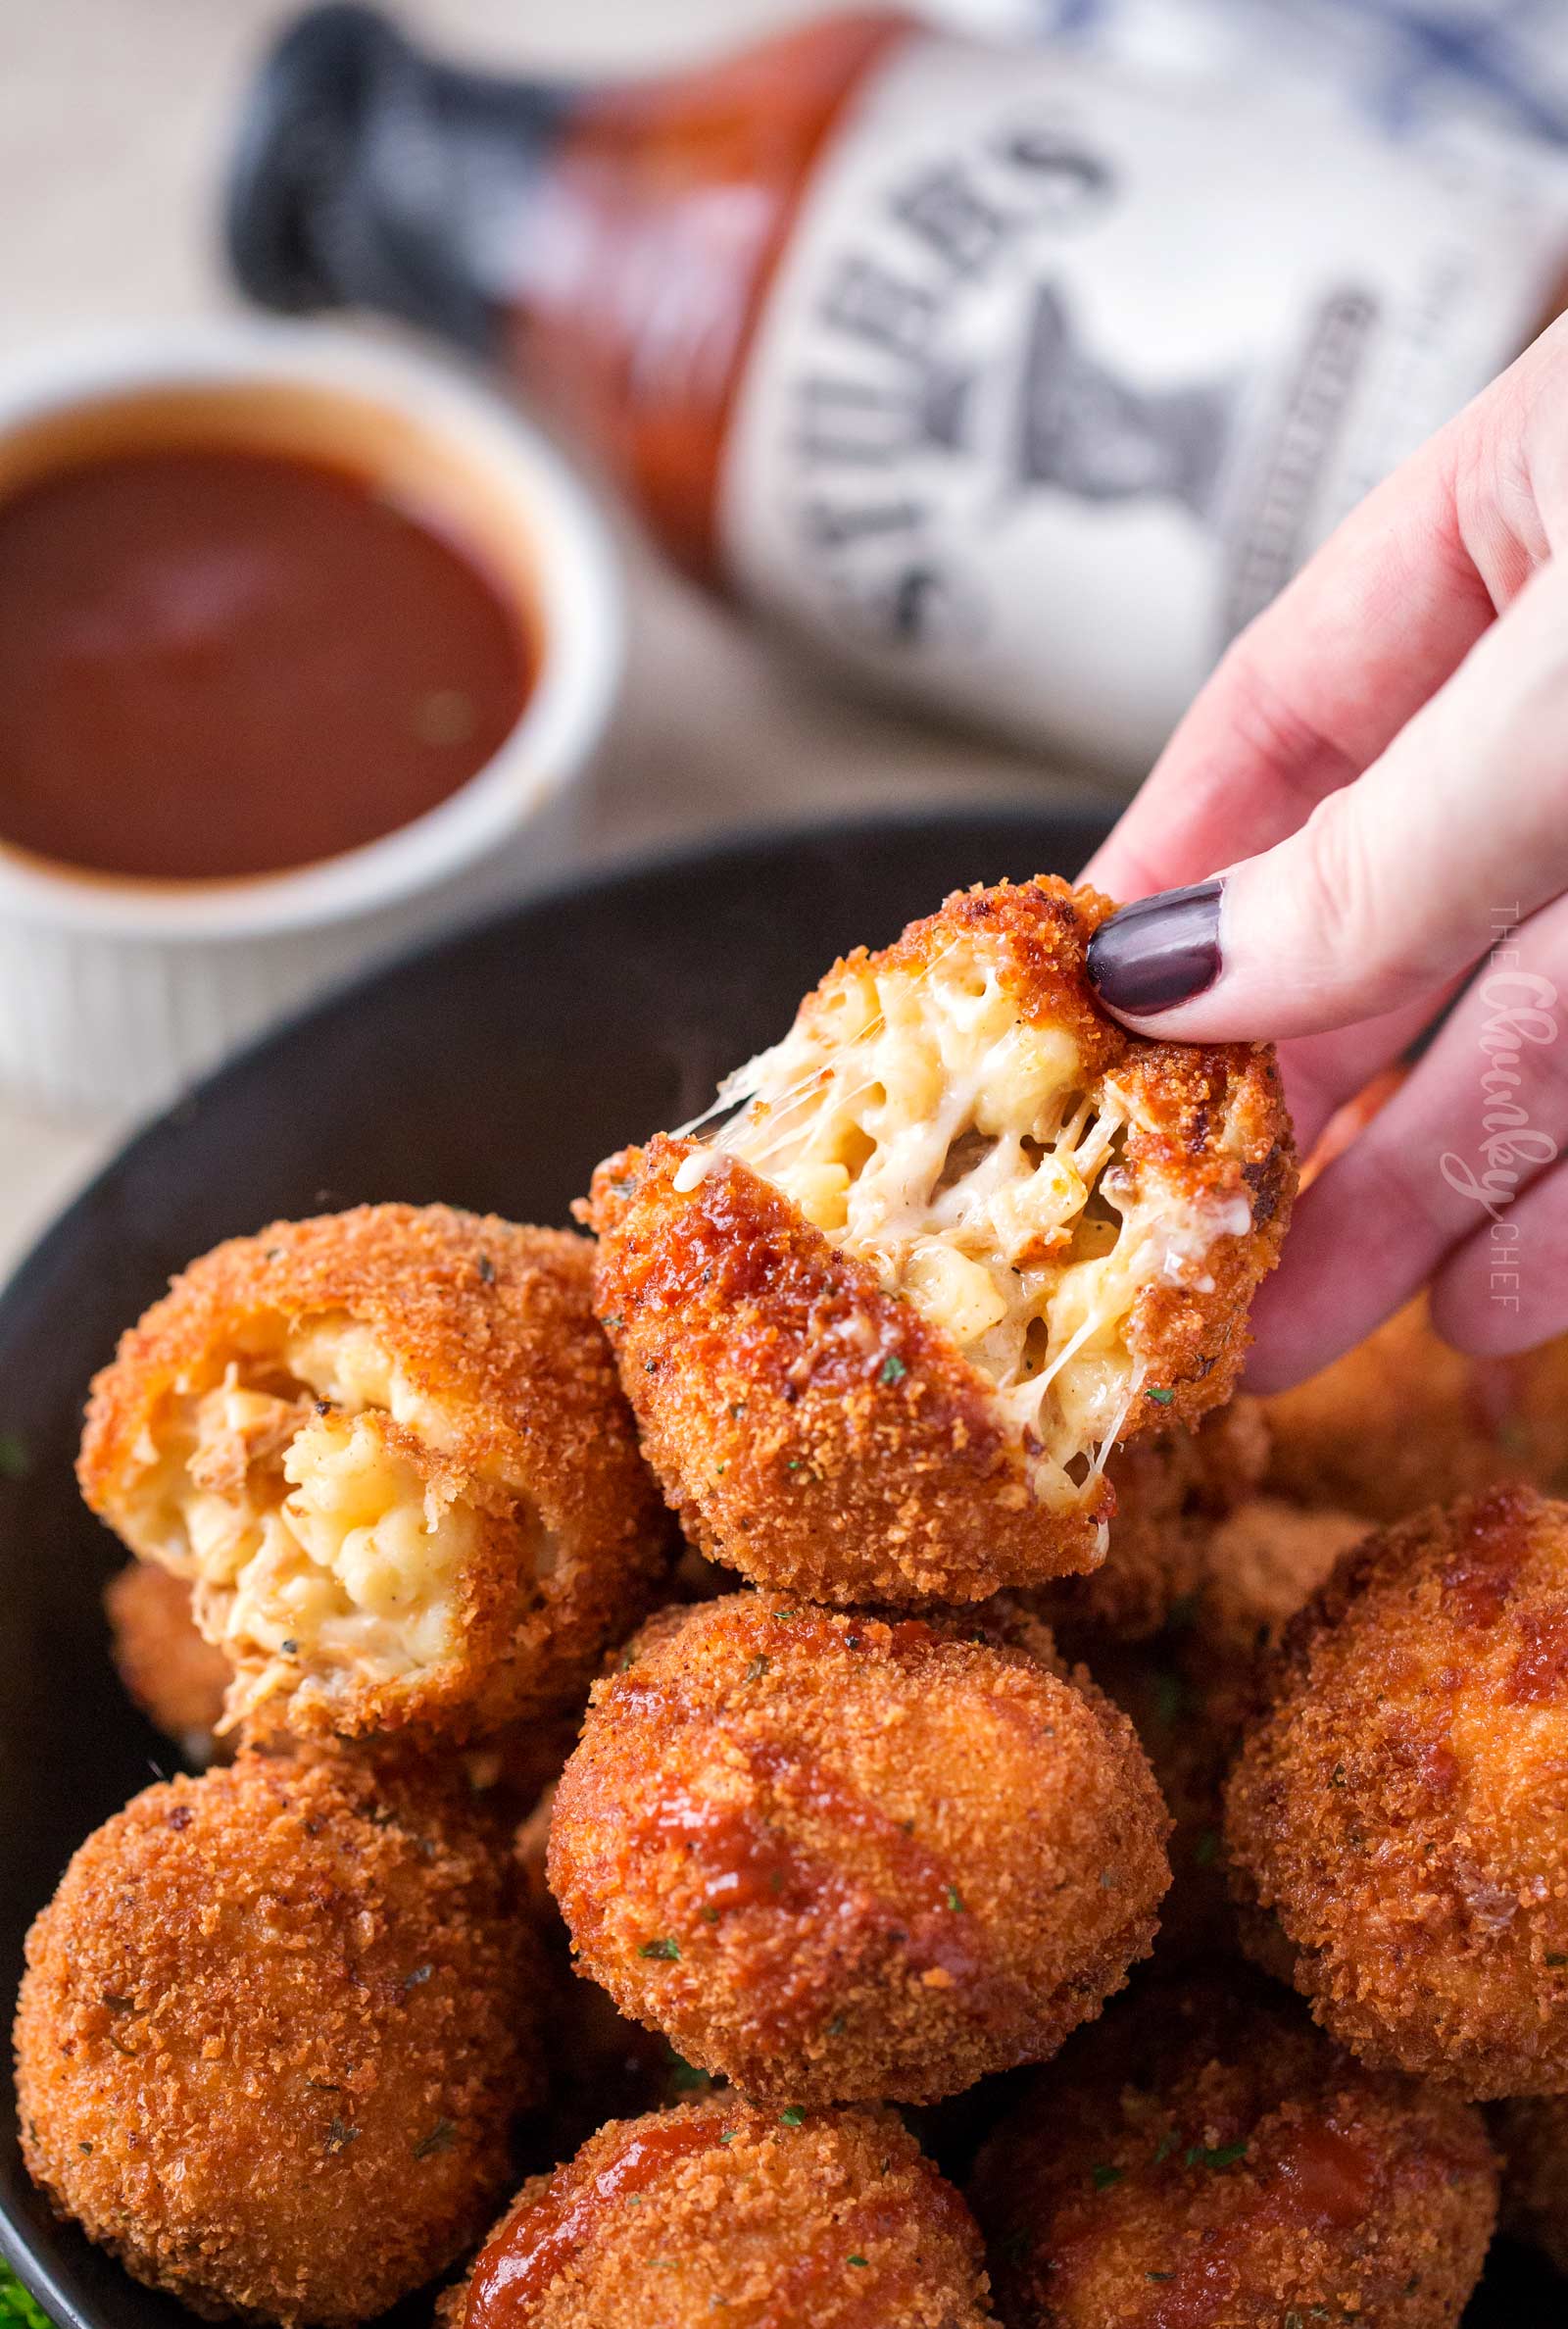 BBQ Pulled Pork Fried Mac and Cheese Bites | 5 cheese homemade Mac and cheese, slow cooker bbq pulled pork, combined and breaded in crispy spiced panko and fried until perfectly golden! | https://thechunkychef.com | #appetizer #gameday #tailgating #friedmacandcheese #pulledpork